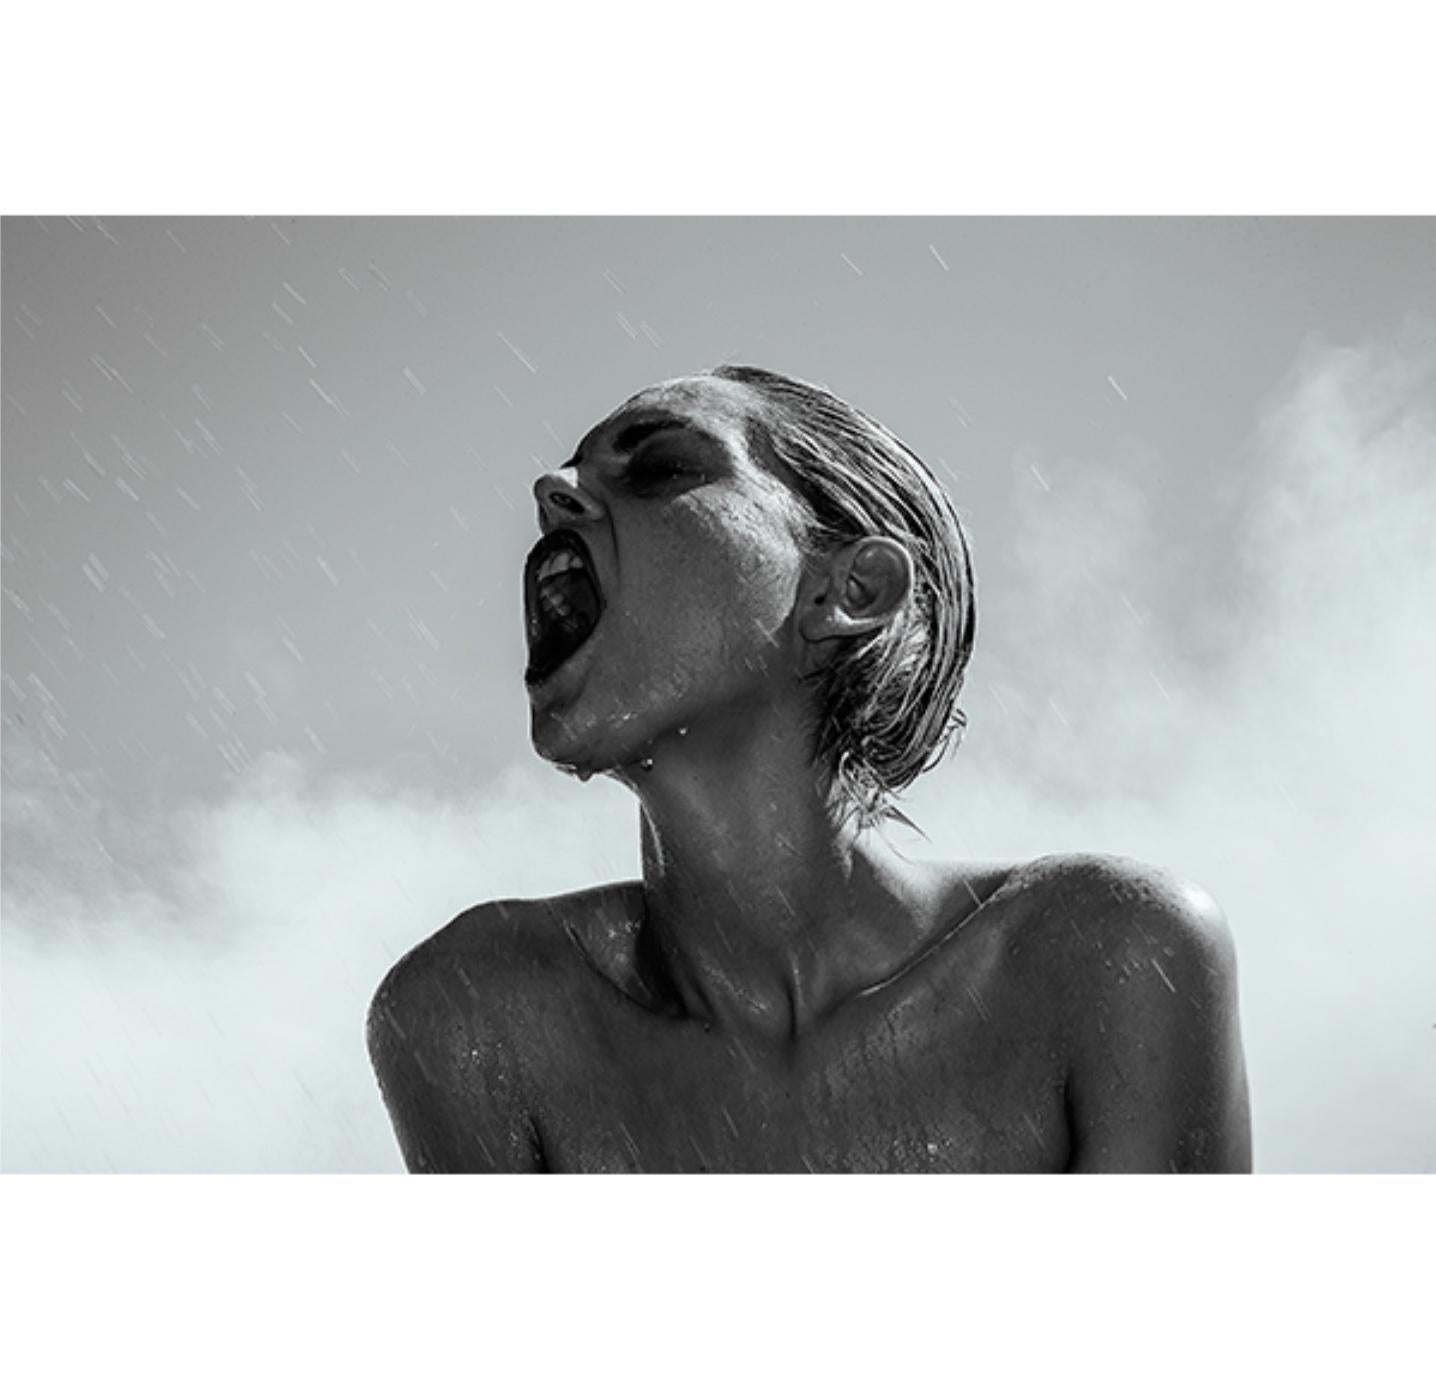 Tyler Shields Black and White Photograph - Pouring Rain (63" x 84")